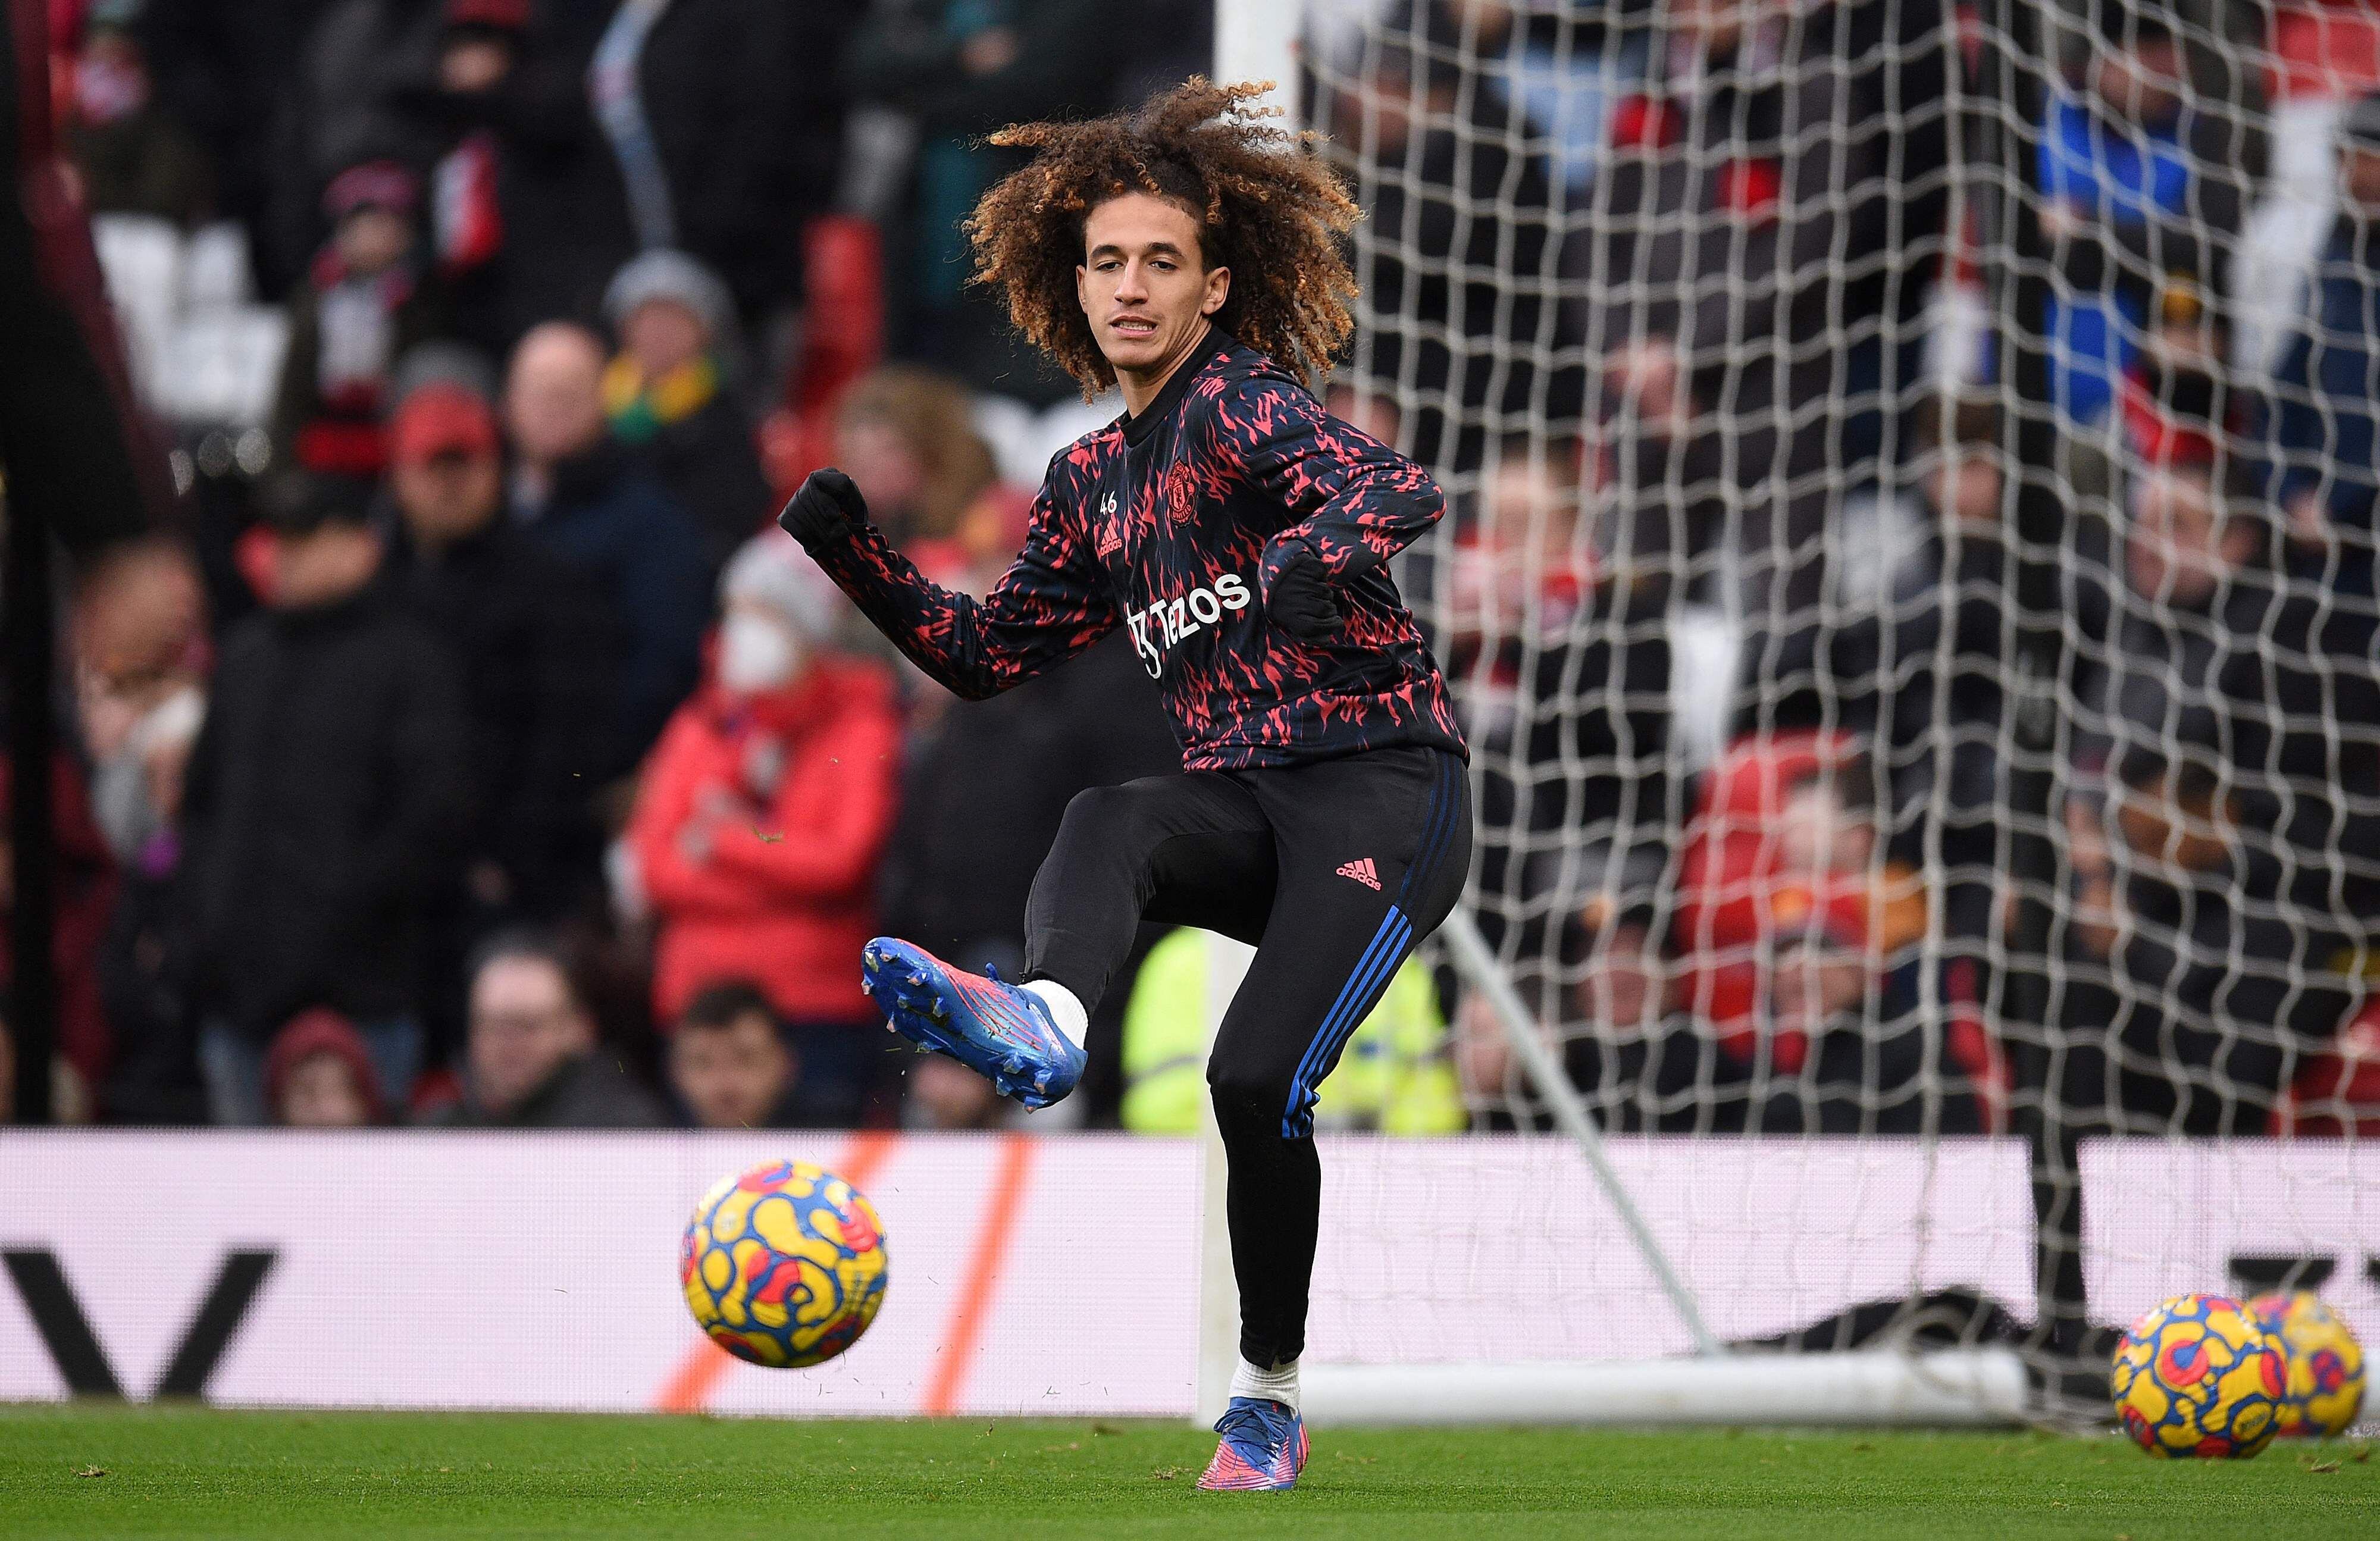 Manchester United's Tunisian midfielder Hannibal Mejbri warms up ahead of during the English Premier League football match between Manchester United and Southampton at Old Trafford in Manchester, north west England, on February 12, 2022. (Photo by Oli SCARFF / AFP) / RESTRICTED TO EDITORIAL USE. No use with unauthorized audio, video, data, fixture lists, club/league logos or 'live' services. Online in-match use limited to 120 images. An additional 40 images may be used in extra time. No video emulation. Social media in-match use limited to 120 images. An additional 40 images may be used in extra time. No use in betting publications, games or single club/league/player publications. / 